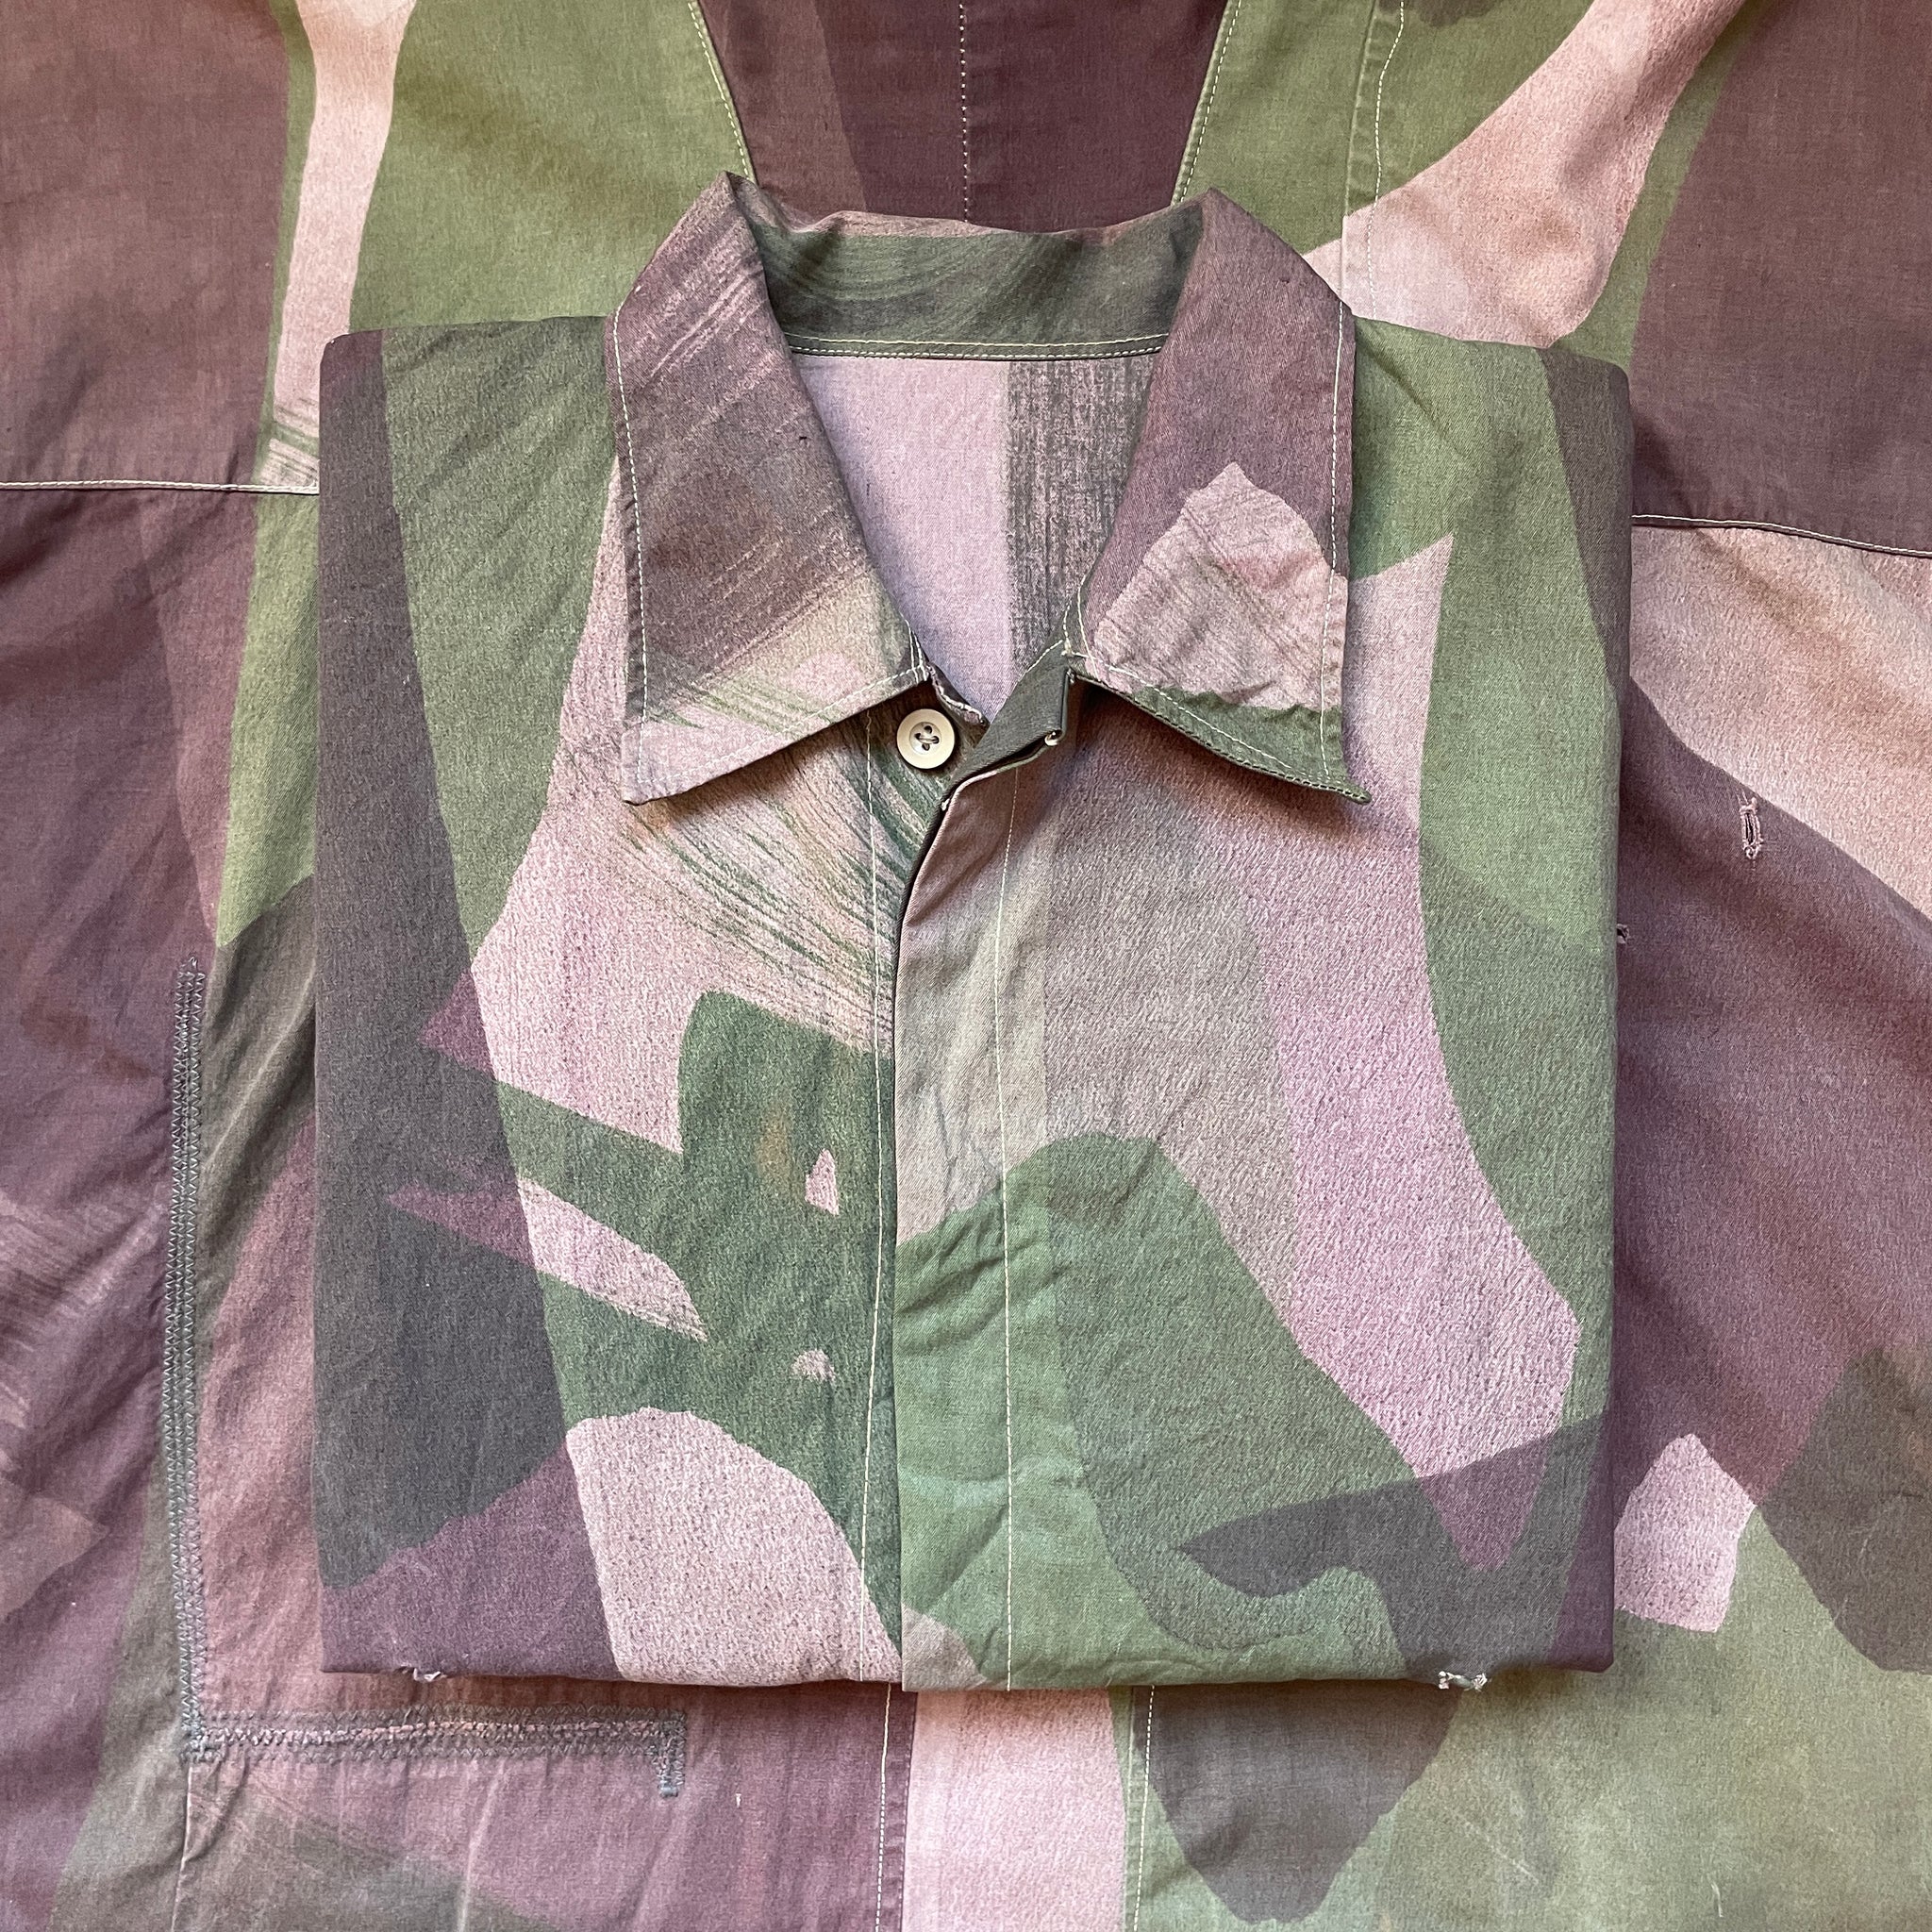 French 1950s Algerian War Retailored Windproof Shirt – The Major's Tailor